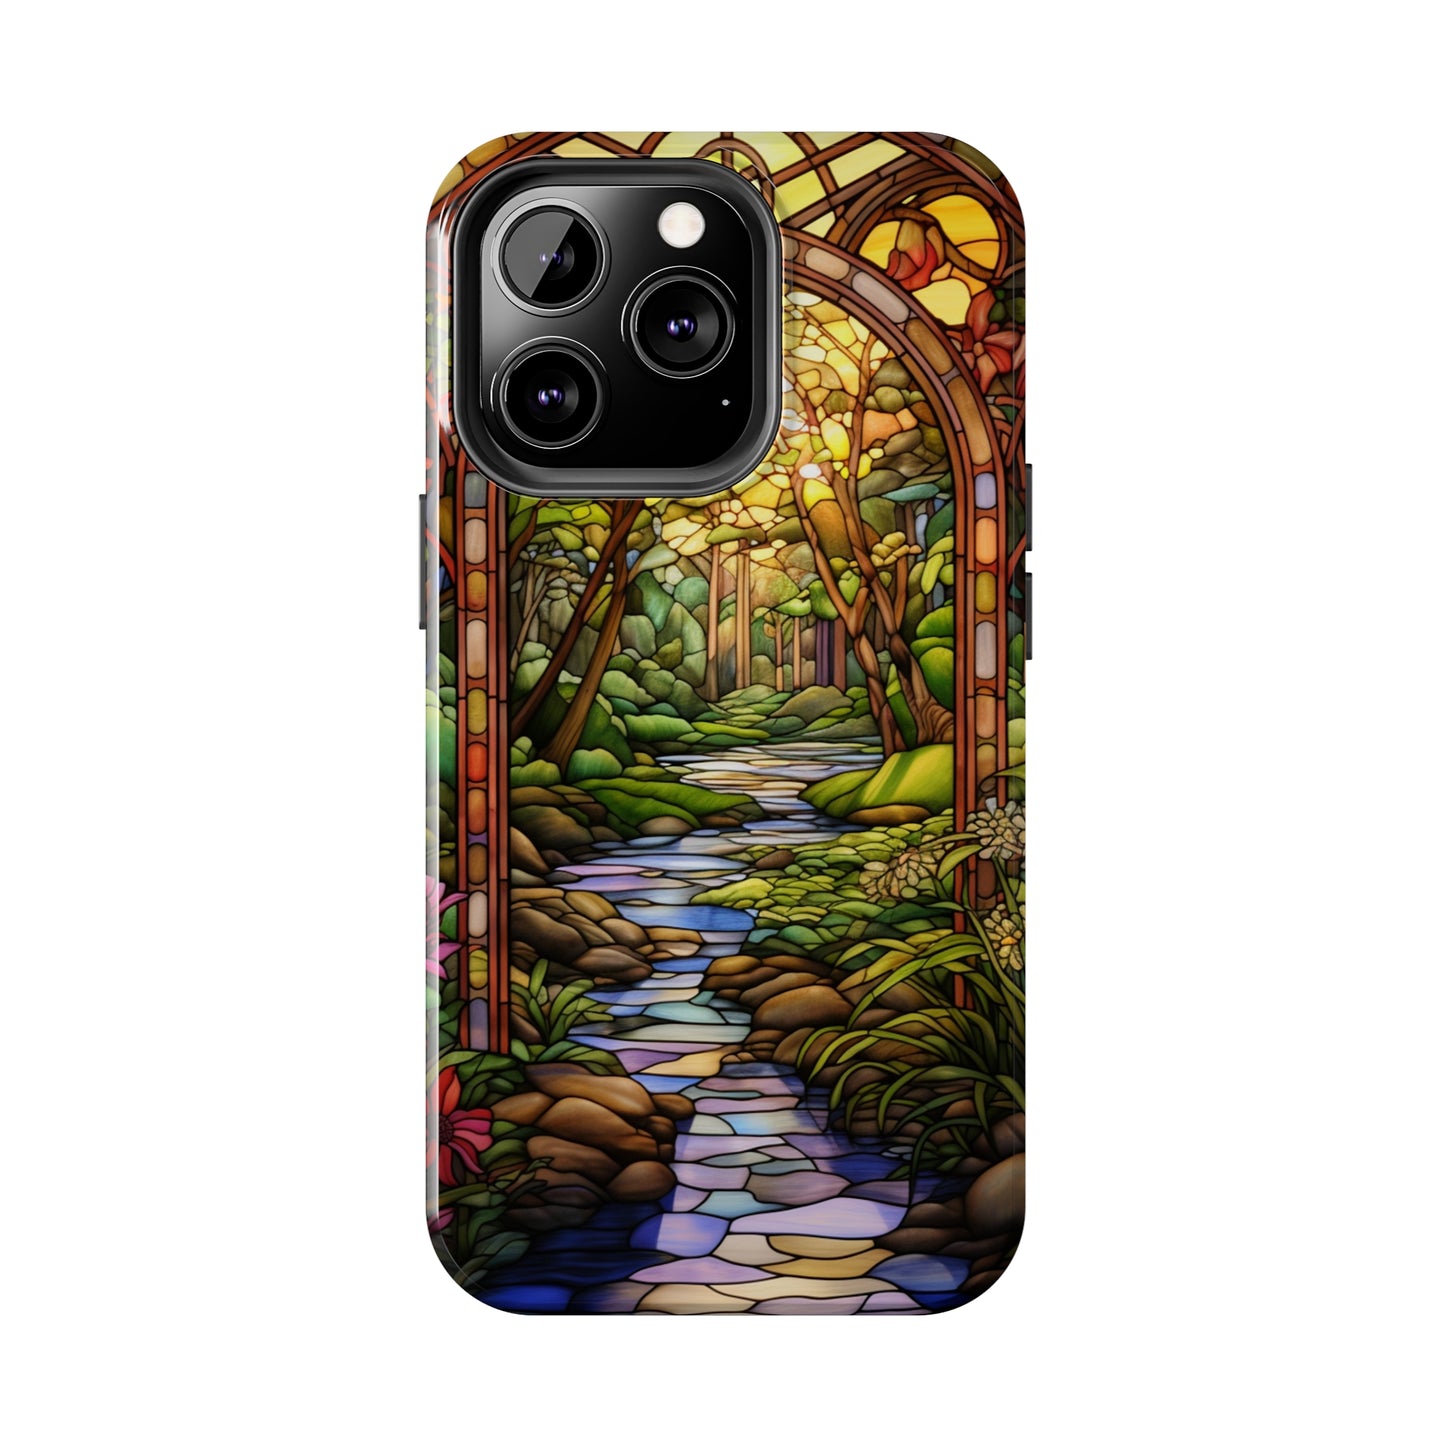 Stained Glass Stone Bridge and River Phone Case: Floral Art Nouveau Design | Bohemian Elegance for iPhone 14 Pro Max, iPhone 14 Plus